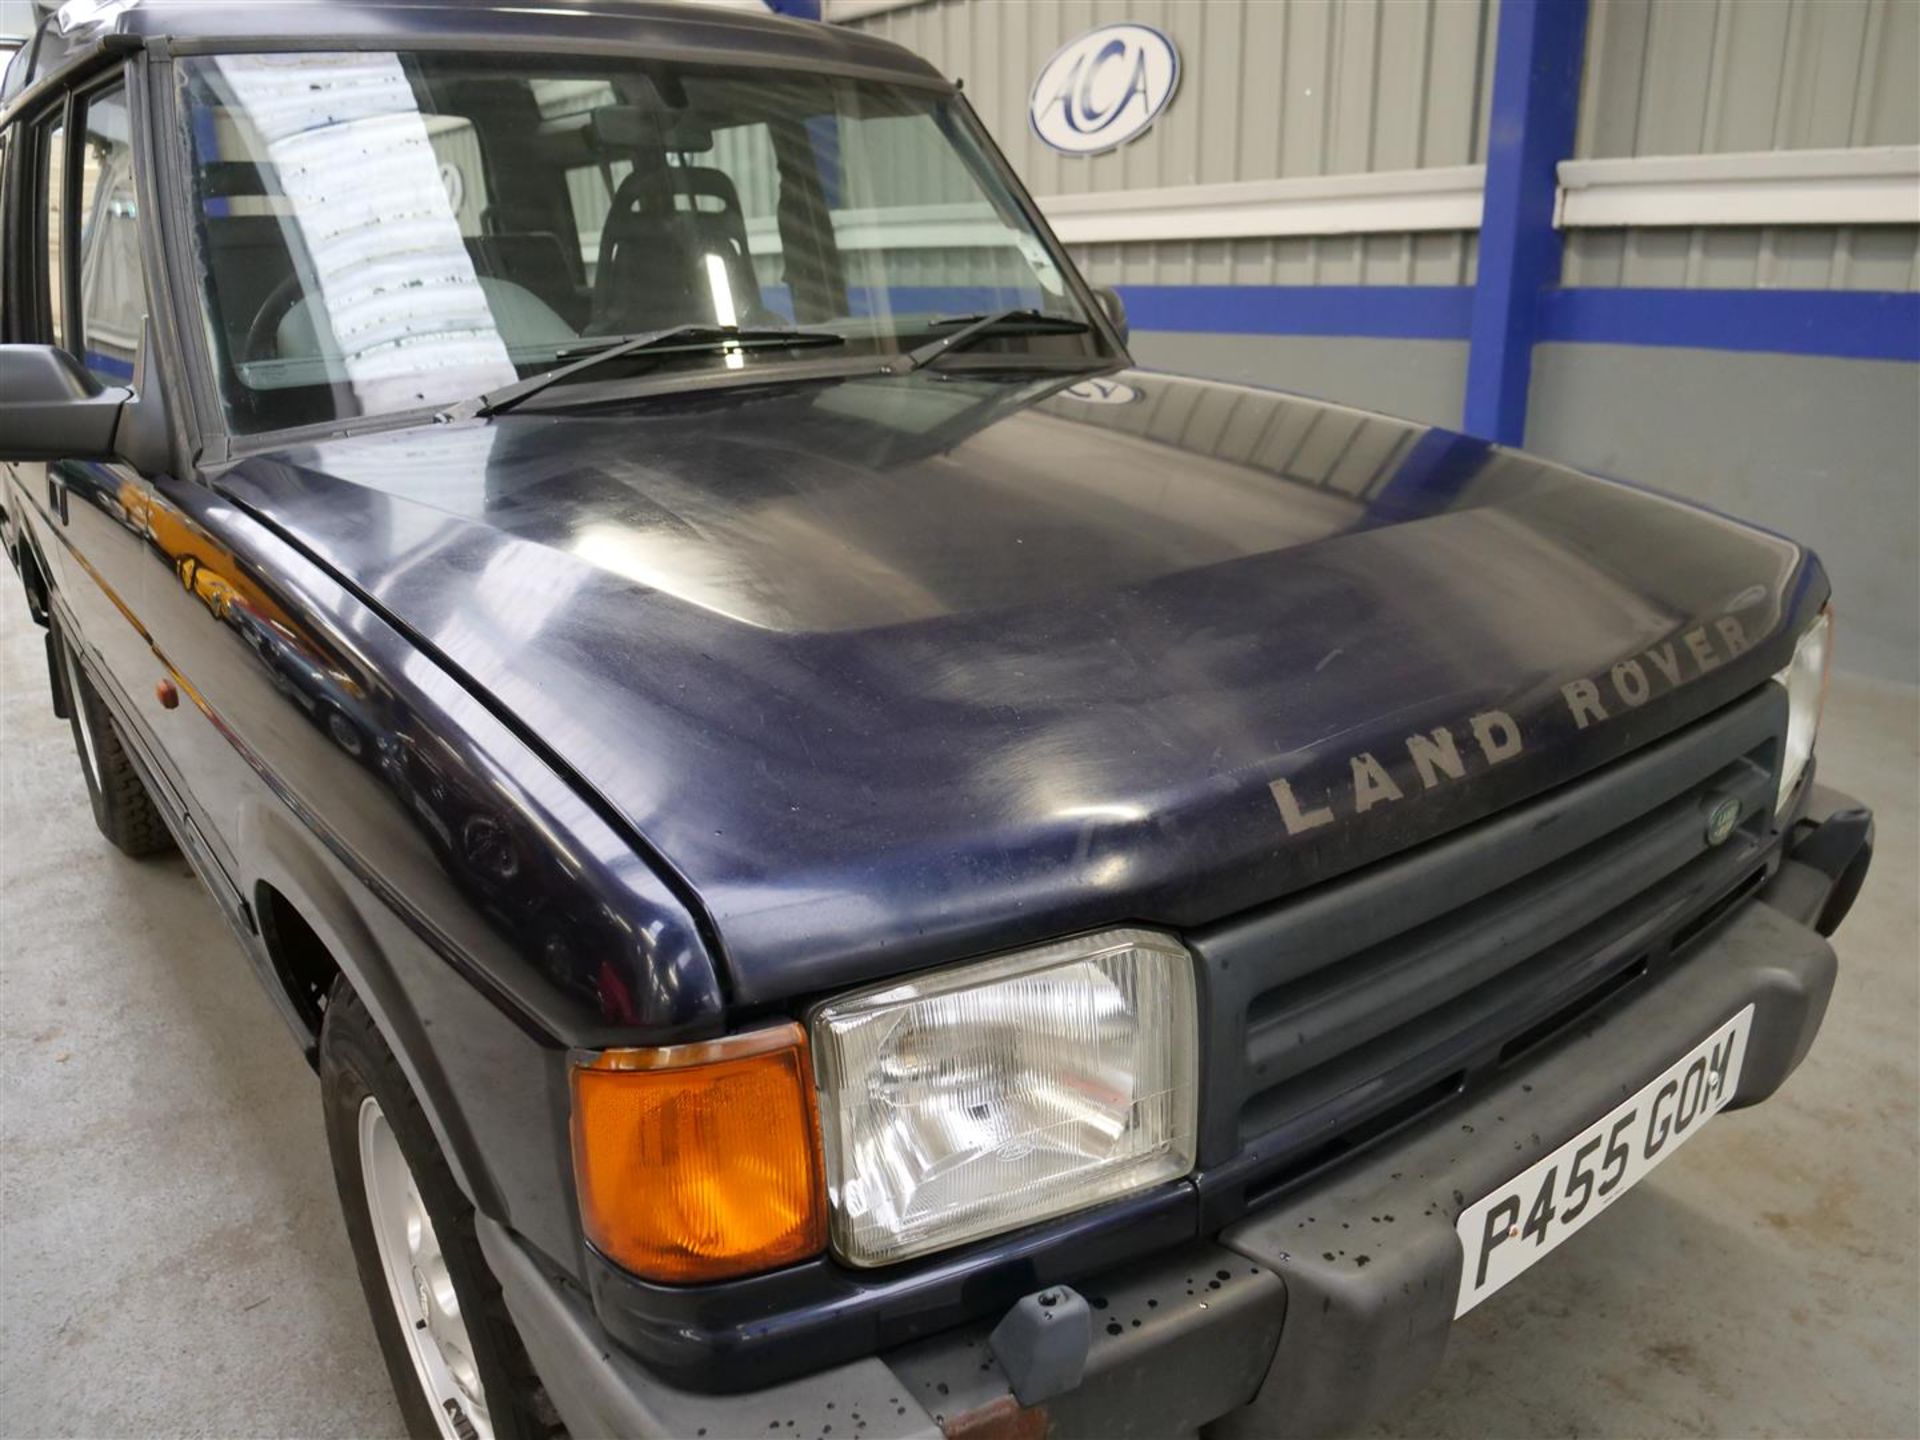 1996 Land Rover Discovery 2.5 TDI - Image 10 of 30